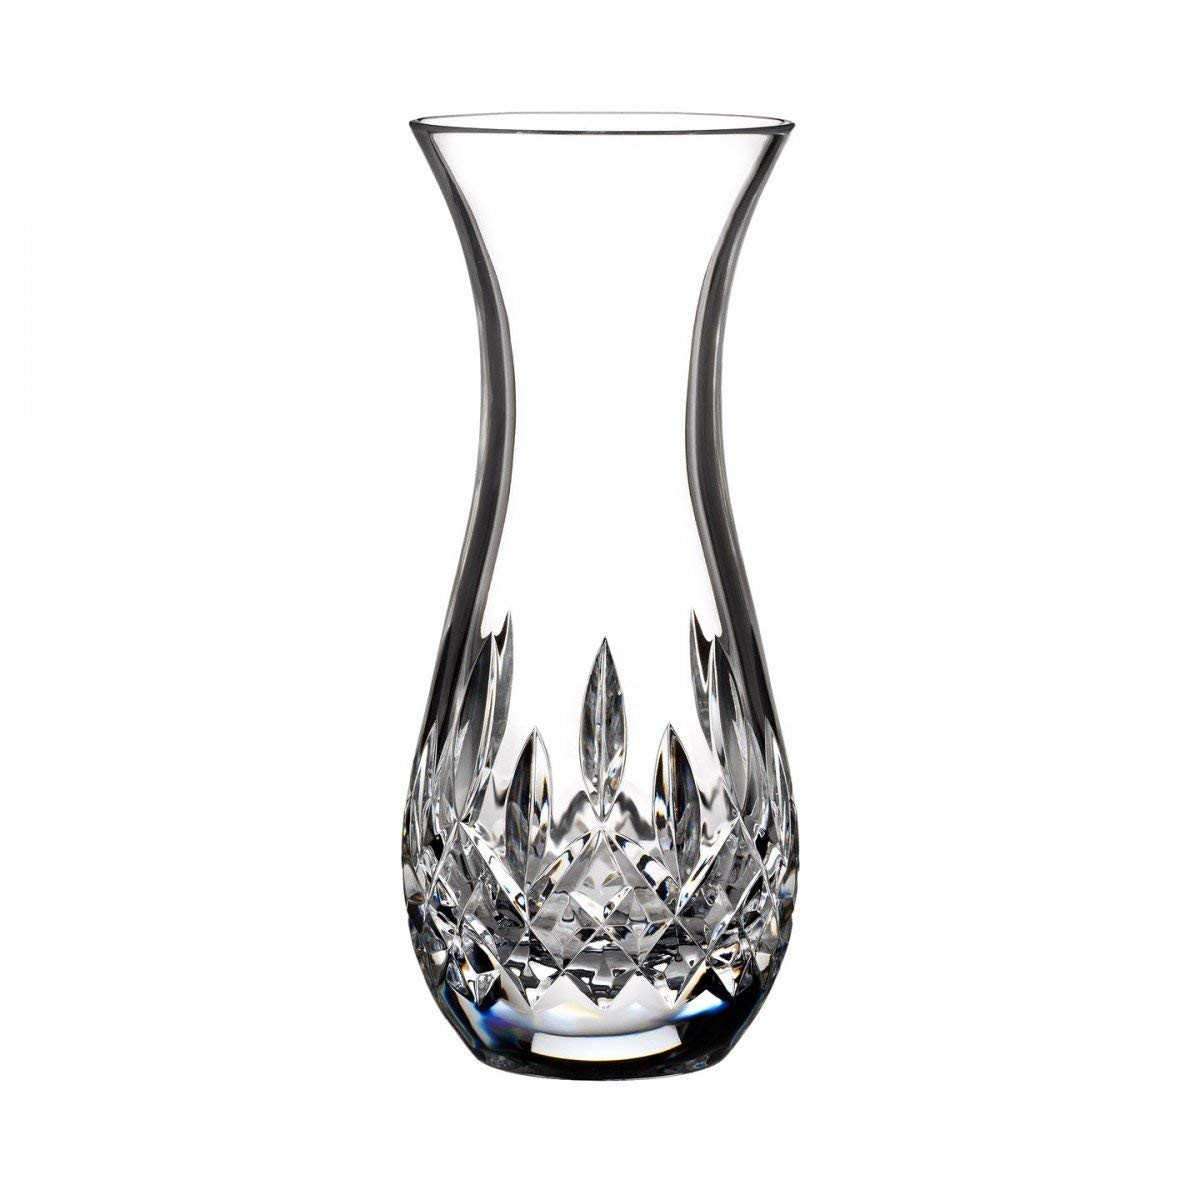 25 Spectacular Waterford Lismore Diamond 8 Vase 2024 free download waterford lismore diamond 8 vase of amazon com waterford lismore sugar 6 bud vase home kitchen within 61rs3a6kkml sl1200